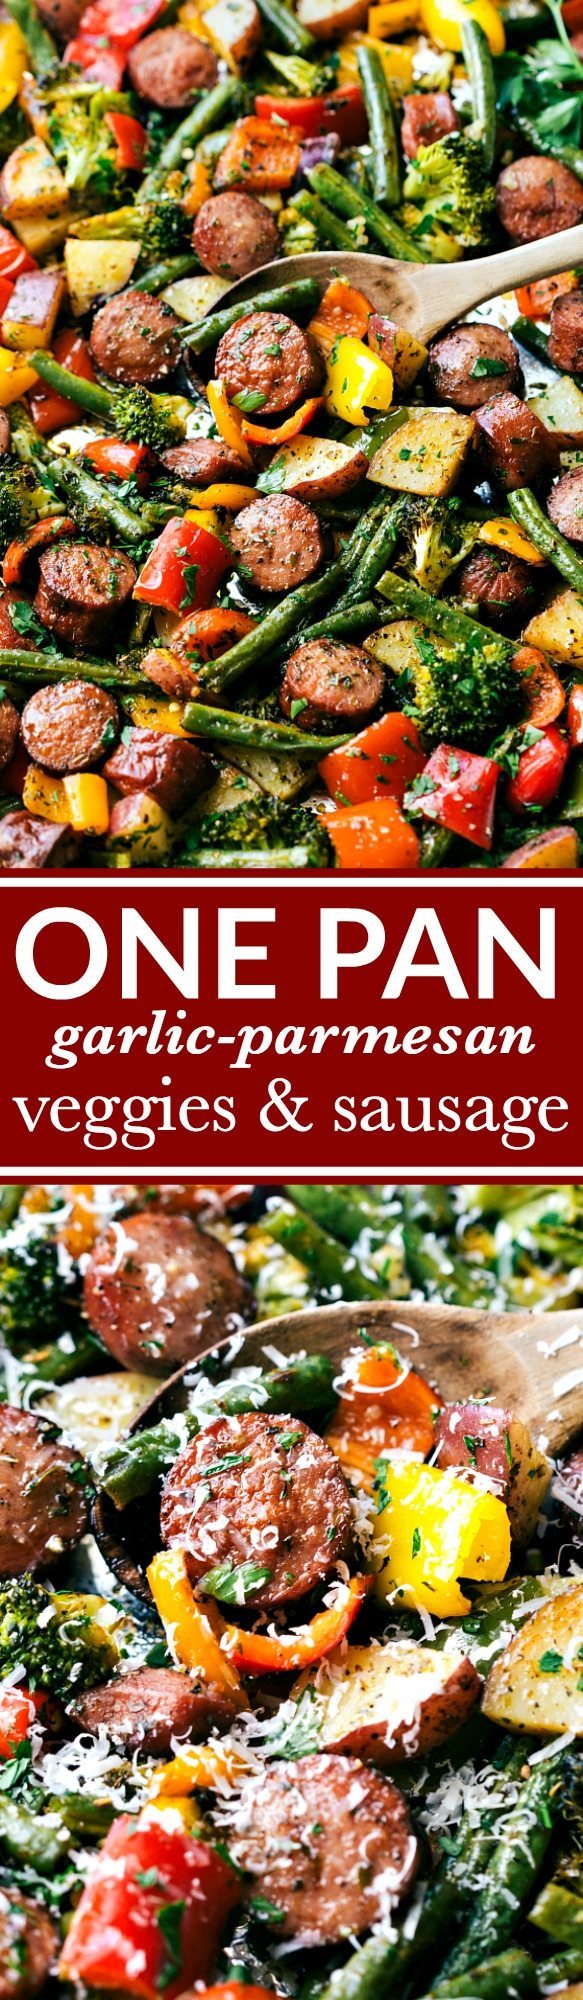 Healthy garlic parmesan roasted veggies with sausage and herbs all made and cooked on one pan. 10 minutes prep, easy clean-up! GREAT MEAL PREP IDEA. Recipe via chelseasmessyapron.com